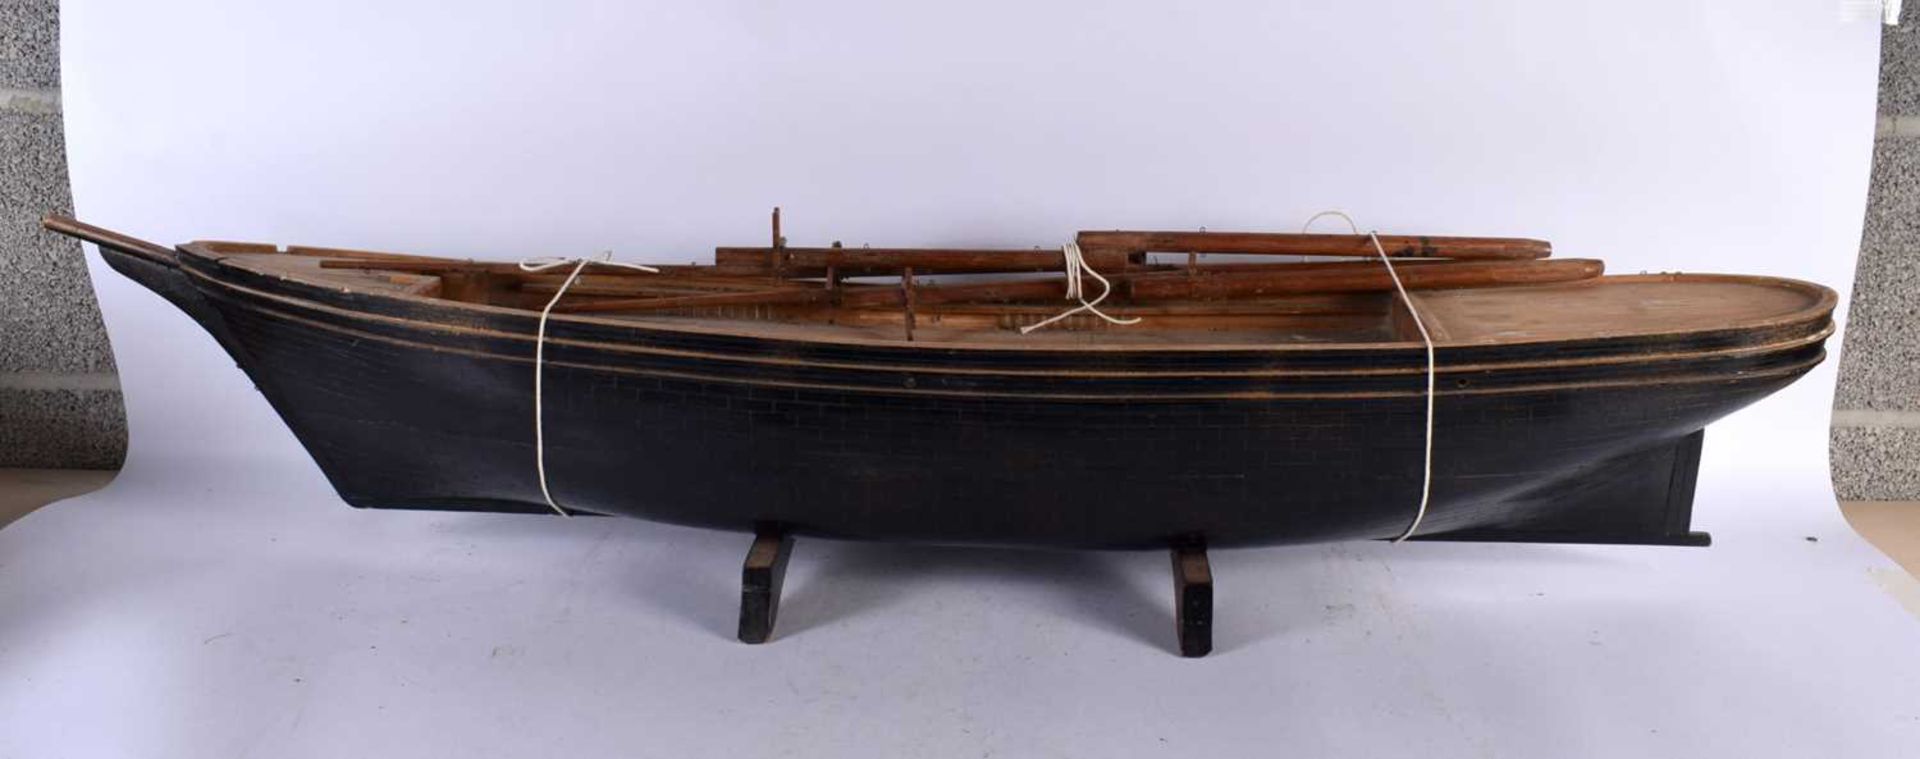 A SCRATCH BUILT MODEL OF A BOAT. 120 cm wide. - Image 3 of 4